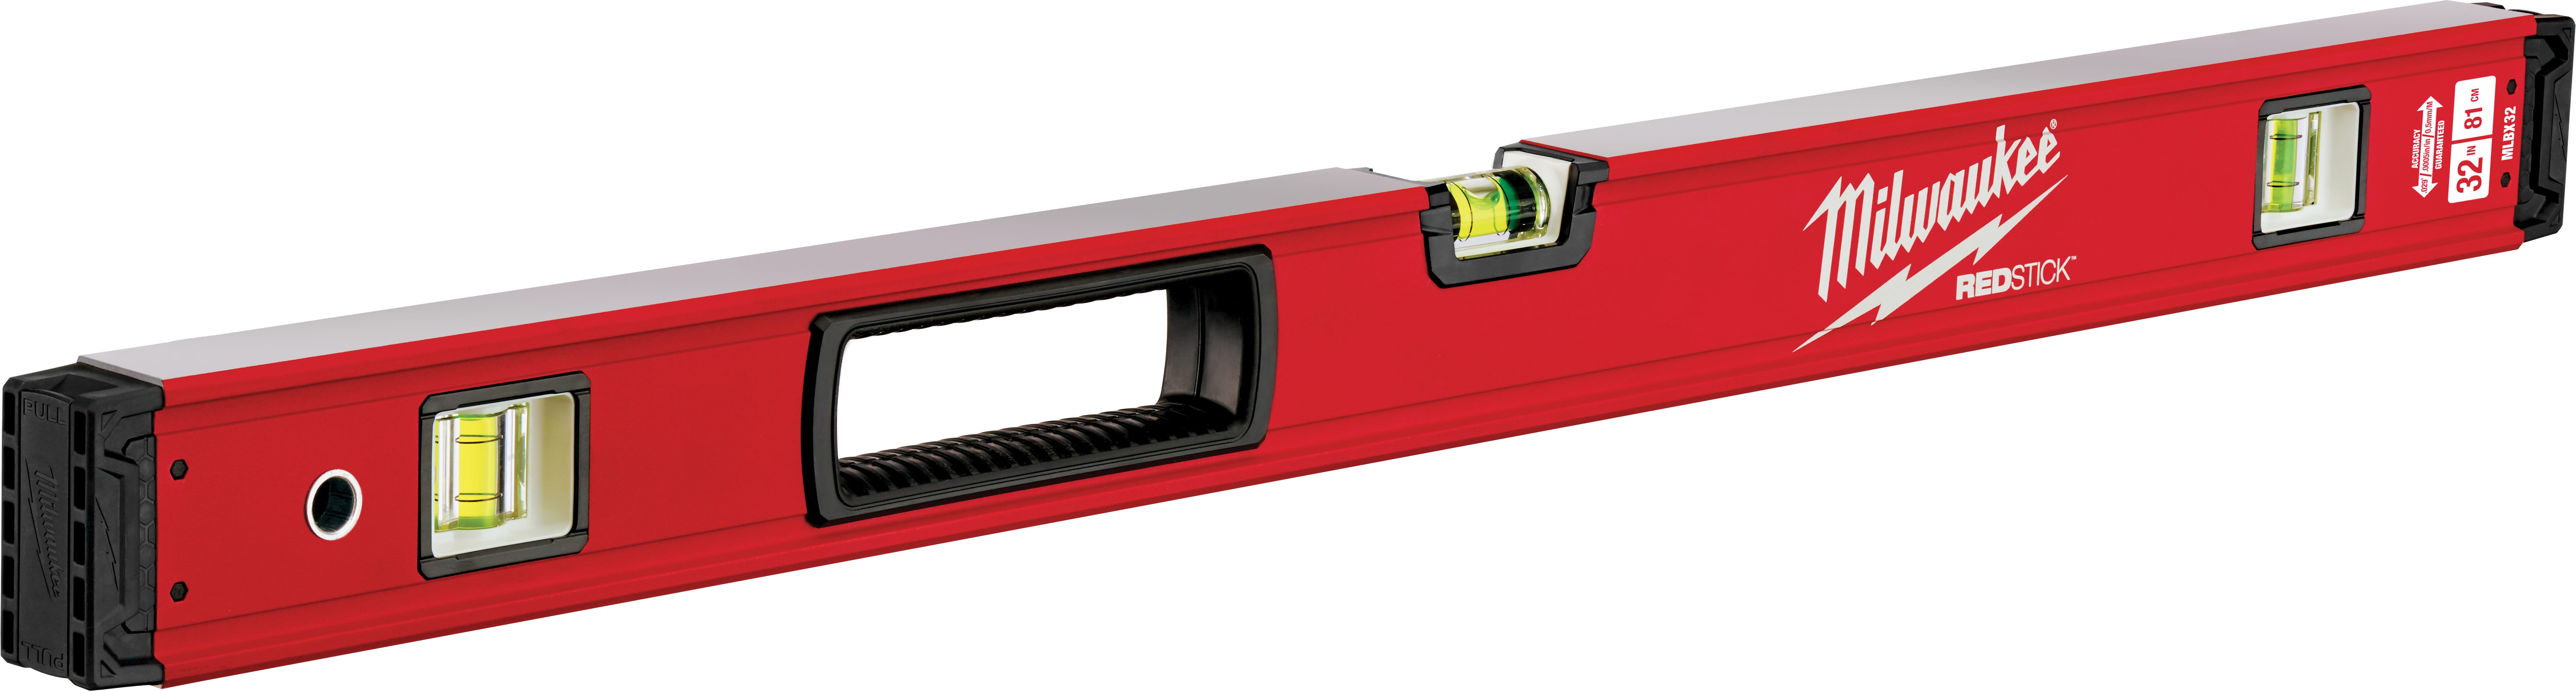 Milwaukee® REDSTICK™ MLBX32 Box Level, 32 in L, 3 Vials, Aluminum, (1) Level/(2) Plumb Vial Position, 0.0005 in/in Accuracy